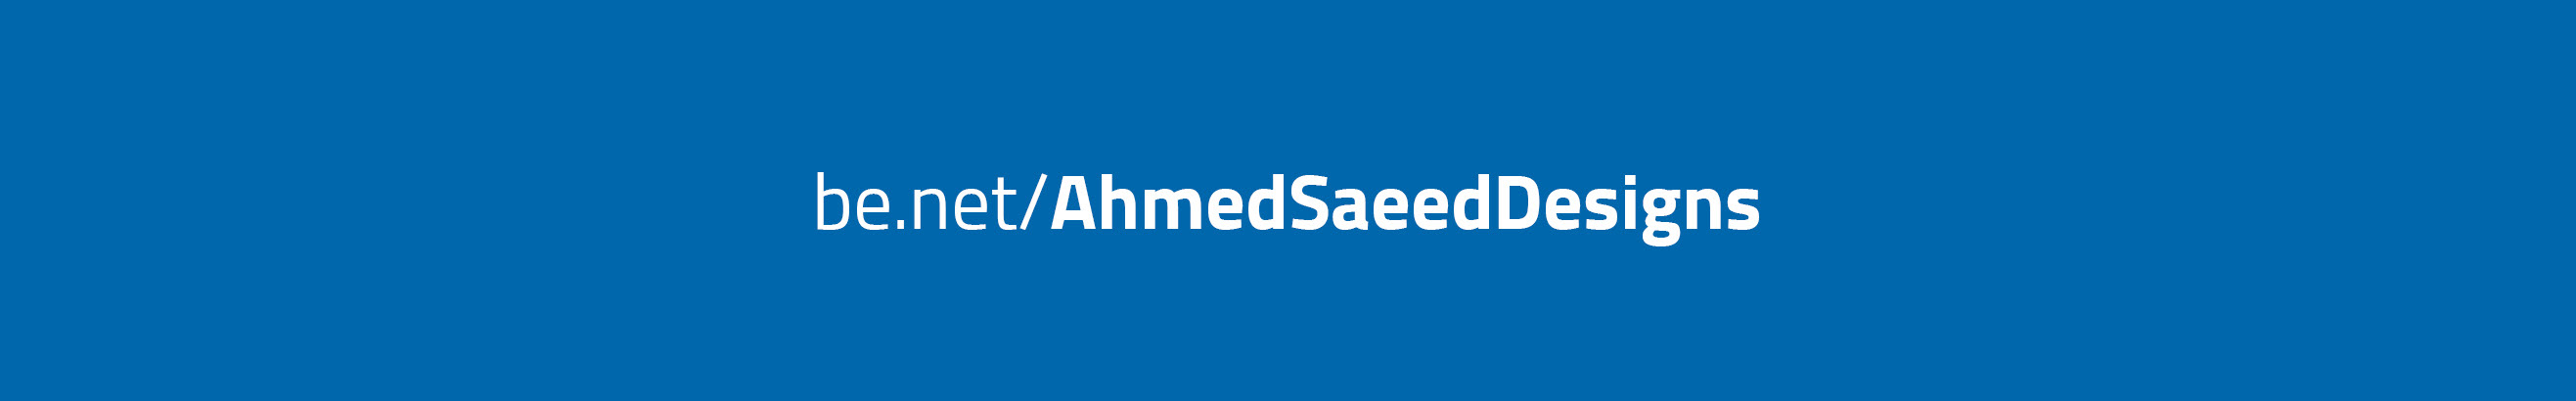 Ahmed Saeed's profile banner